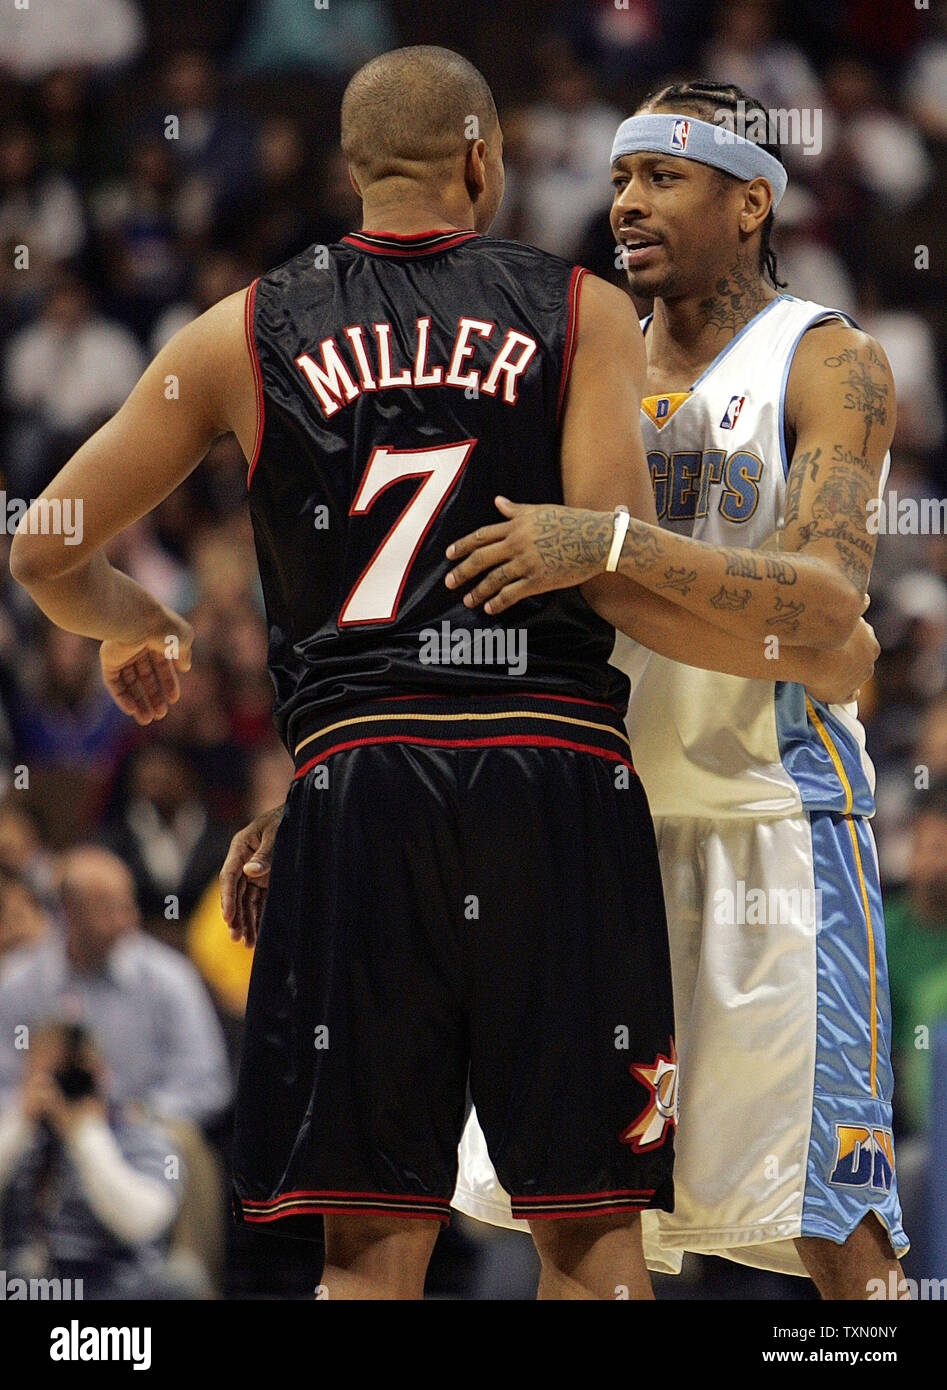 Denver Nuggets guard Allen Iverson (R) greets Philadelphia 76ers guard Andre Miller (L) prior to tipoff at the Pepsi Center in Denver January 2, 2007.  Iverson came to Denver in a trade involving Miller.  (UPI Photo/Gary C. Caskey) Stock Photo